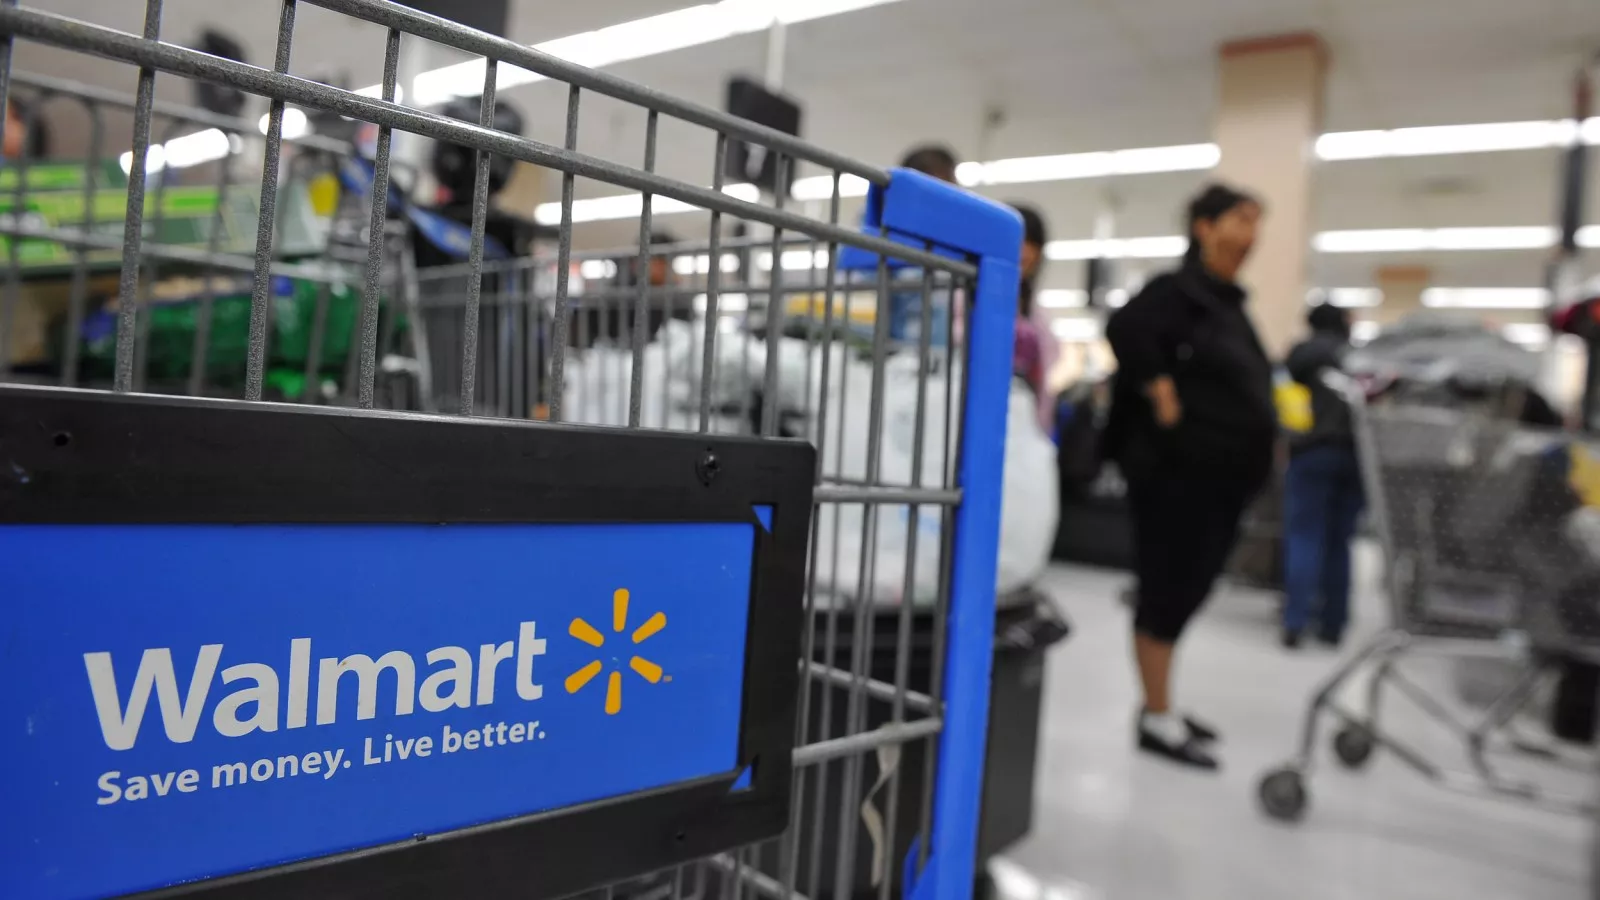 Does Walmart Build Cases On Shoplifters In 2022? (Warning)